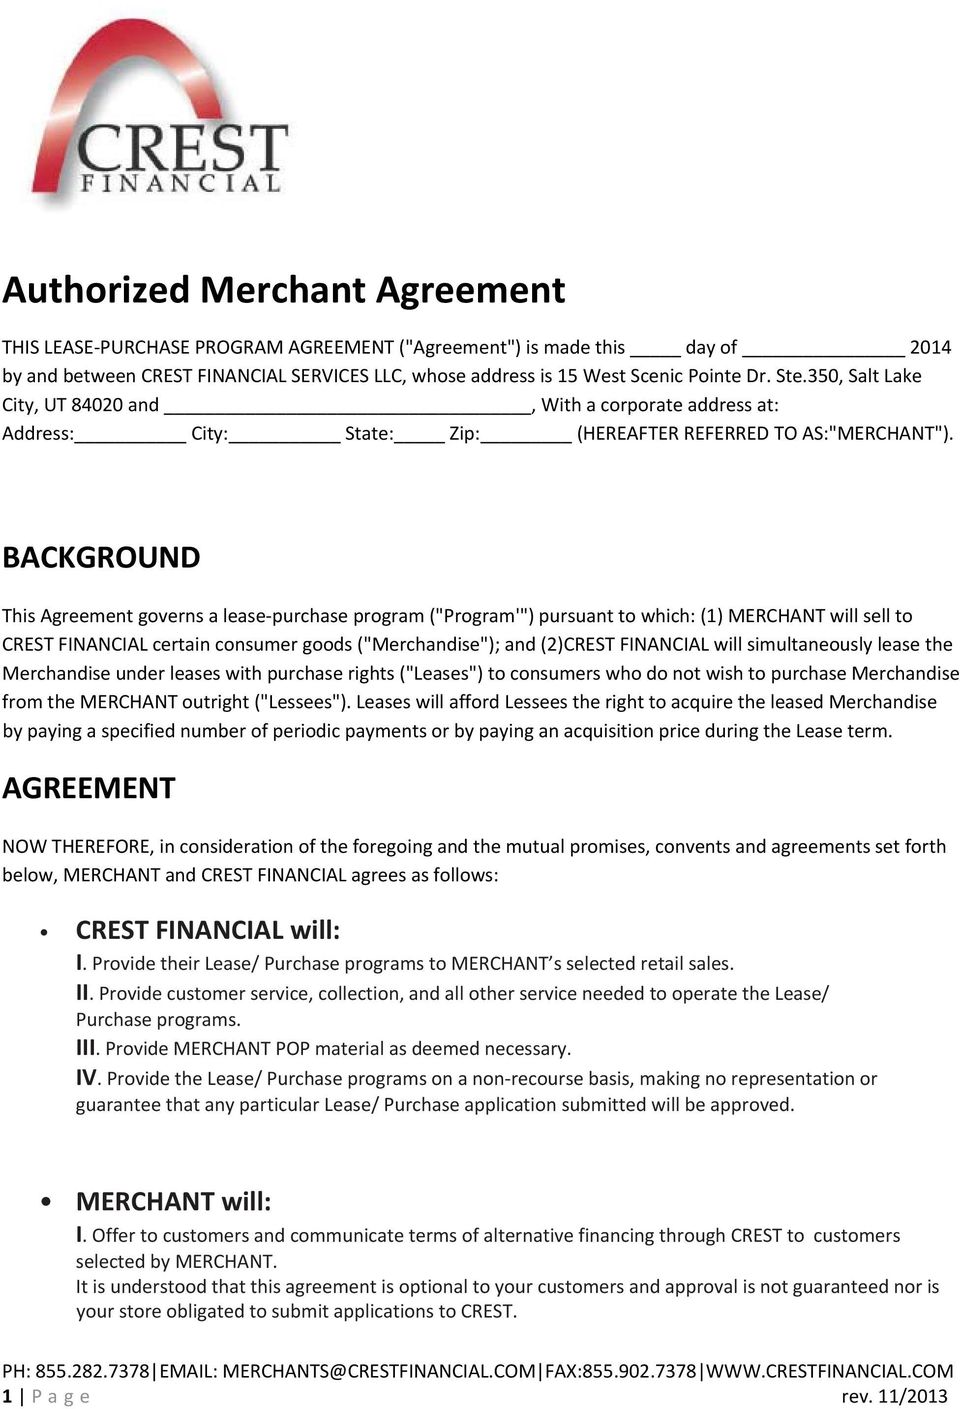 BACKGROUND This Agreement governs a lease purchase program ("Program'") pursuant to which: (1) MERCHANT will sell to CREST FINANCIAL certain consumer goods ("Merchandise"); and (2)CREST FINANCIAL